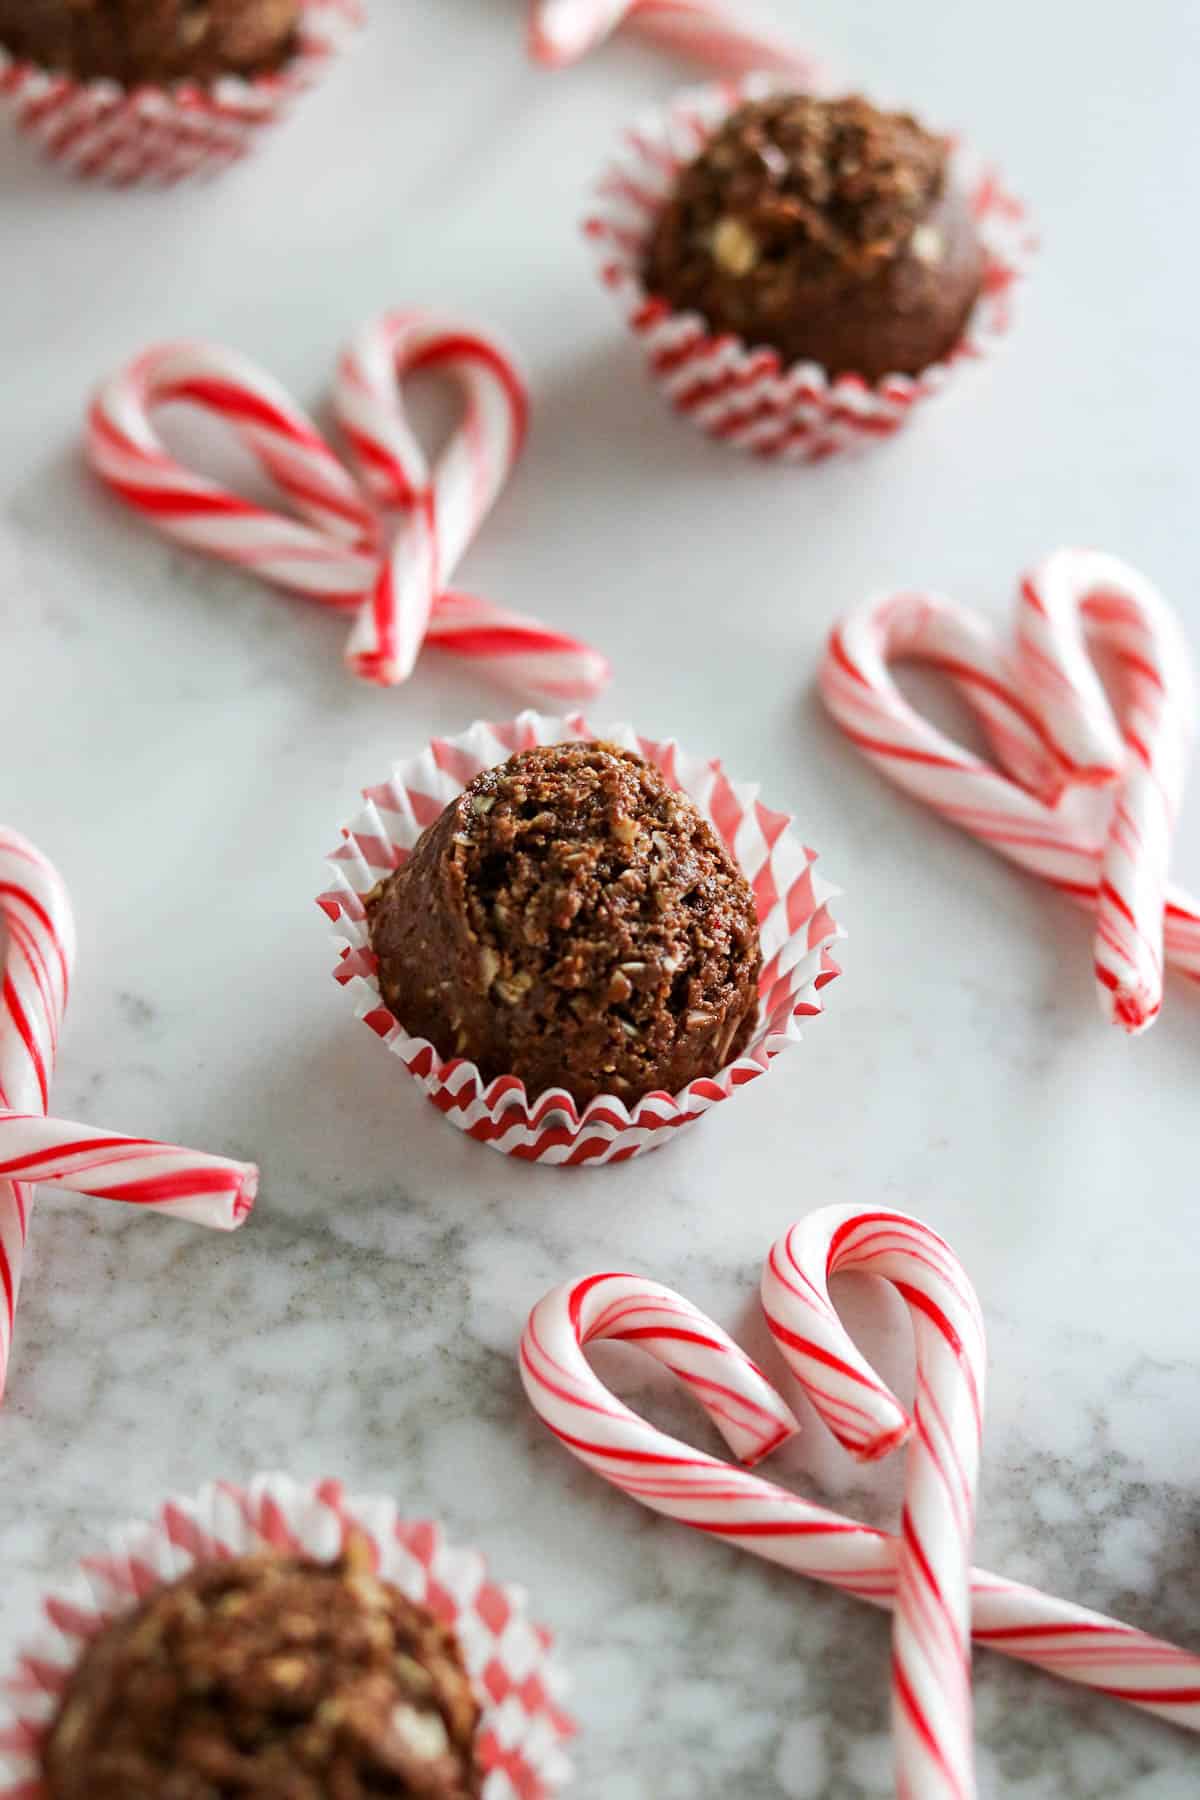 Candy Cane Cocoa Powerballs striped red and white wrappers